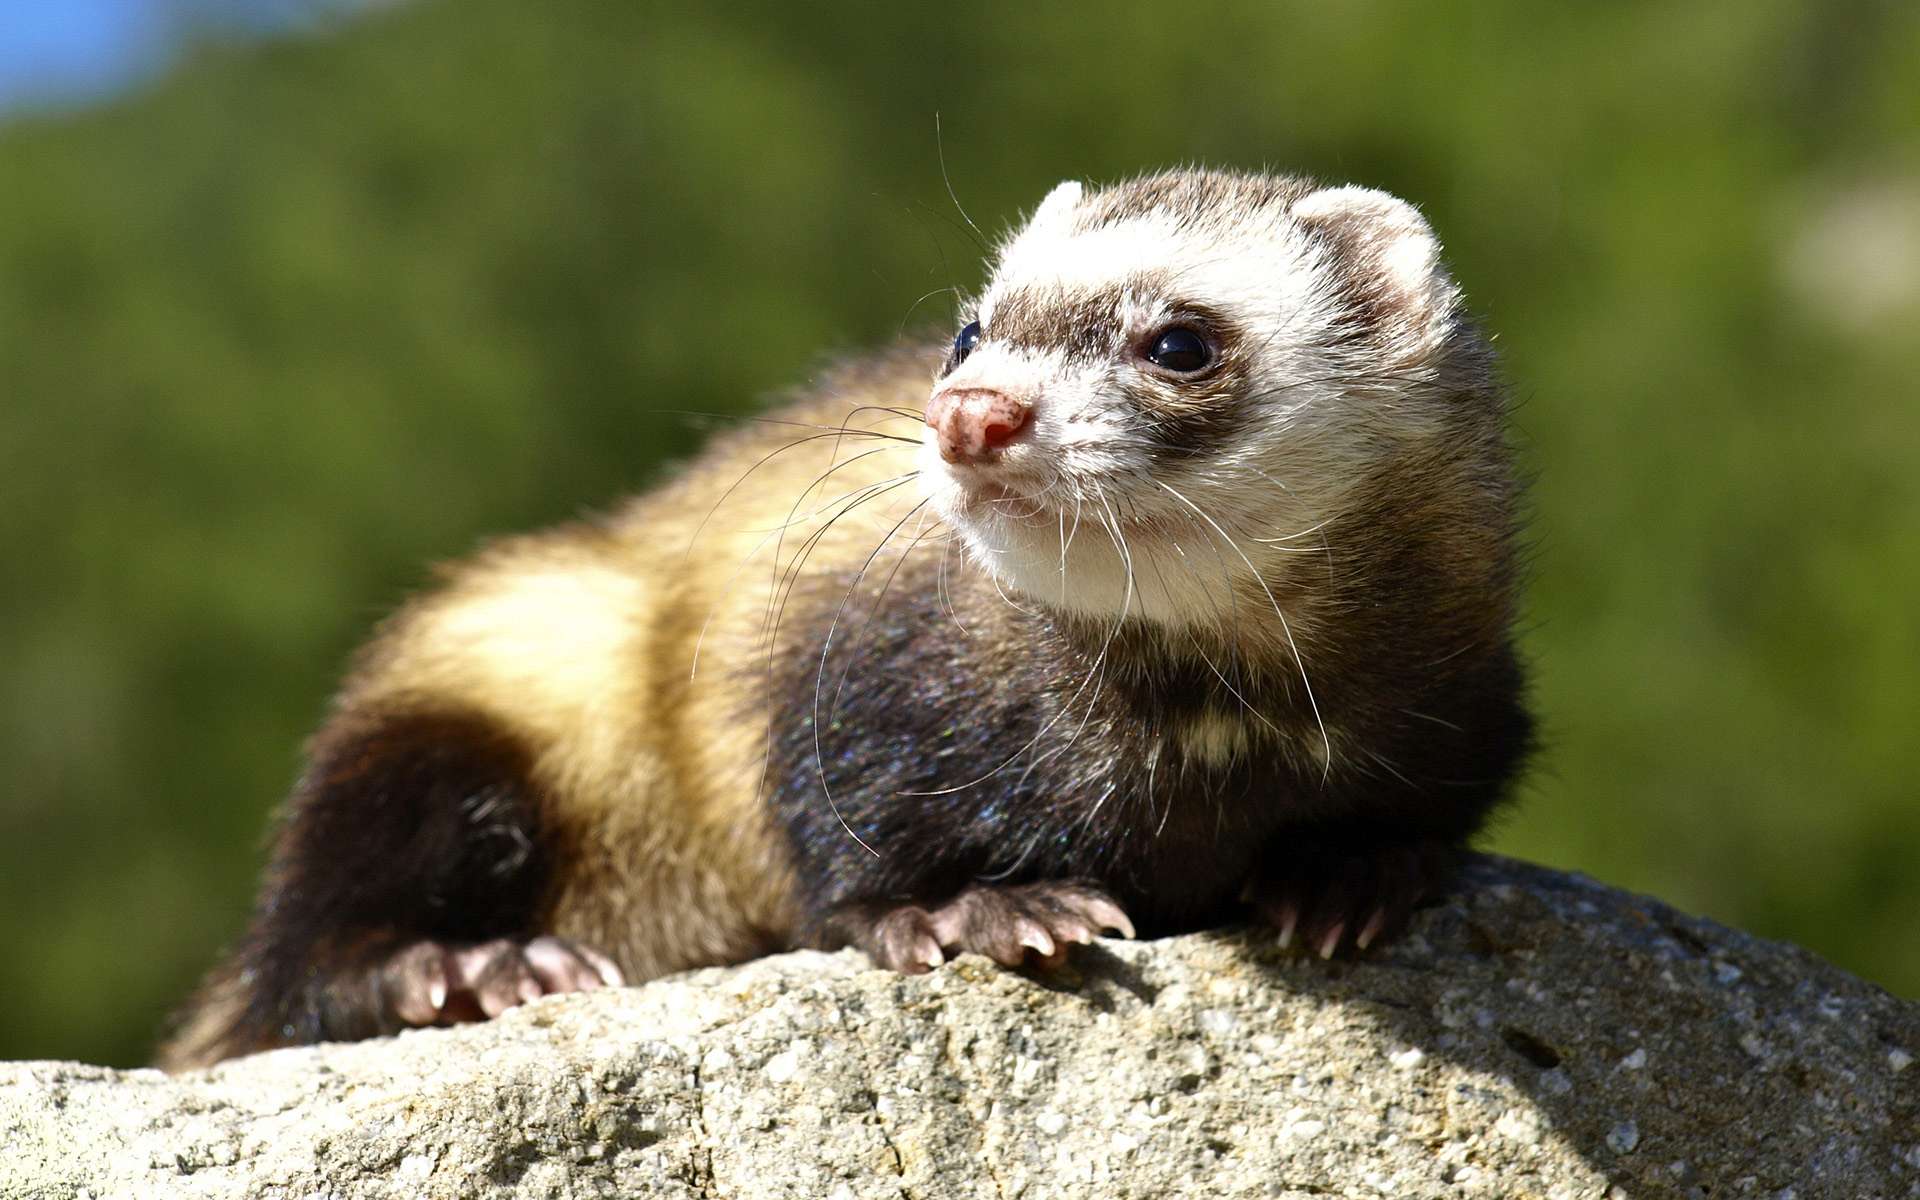 tips-for-caring-for-your-ferret-from-an-exotic-animal-vet